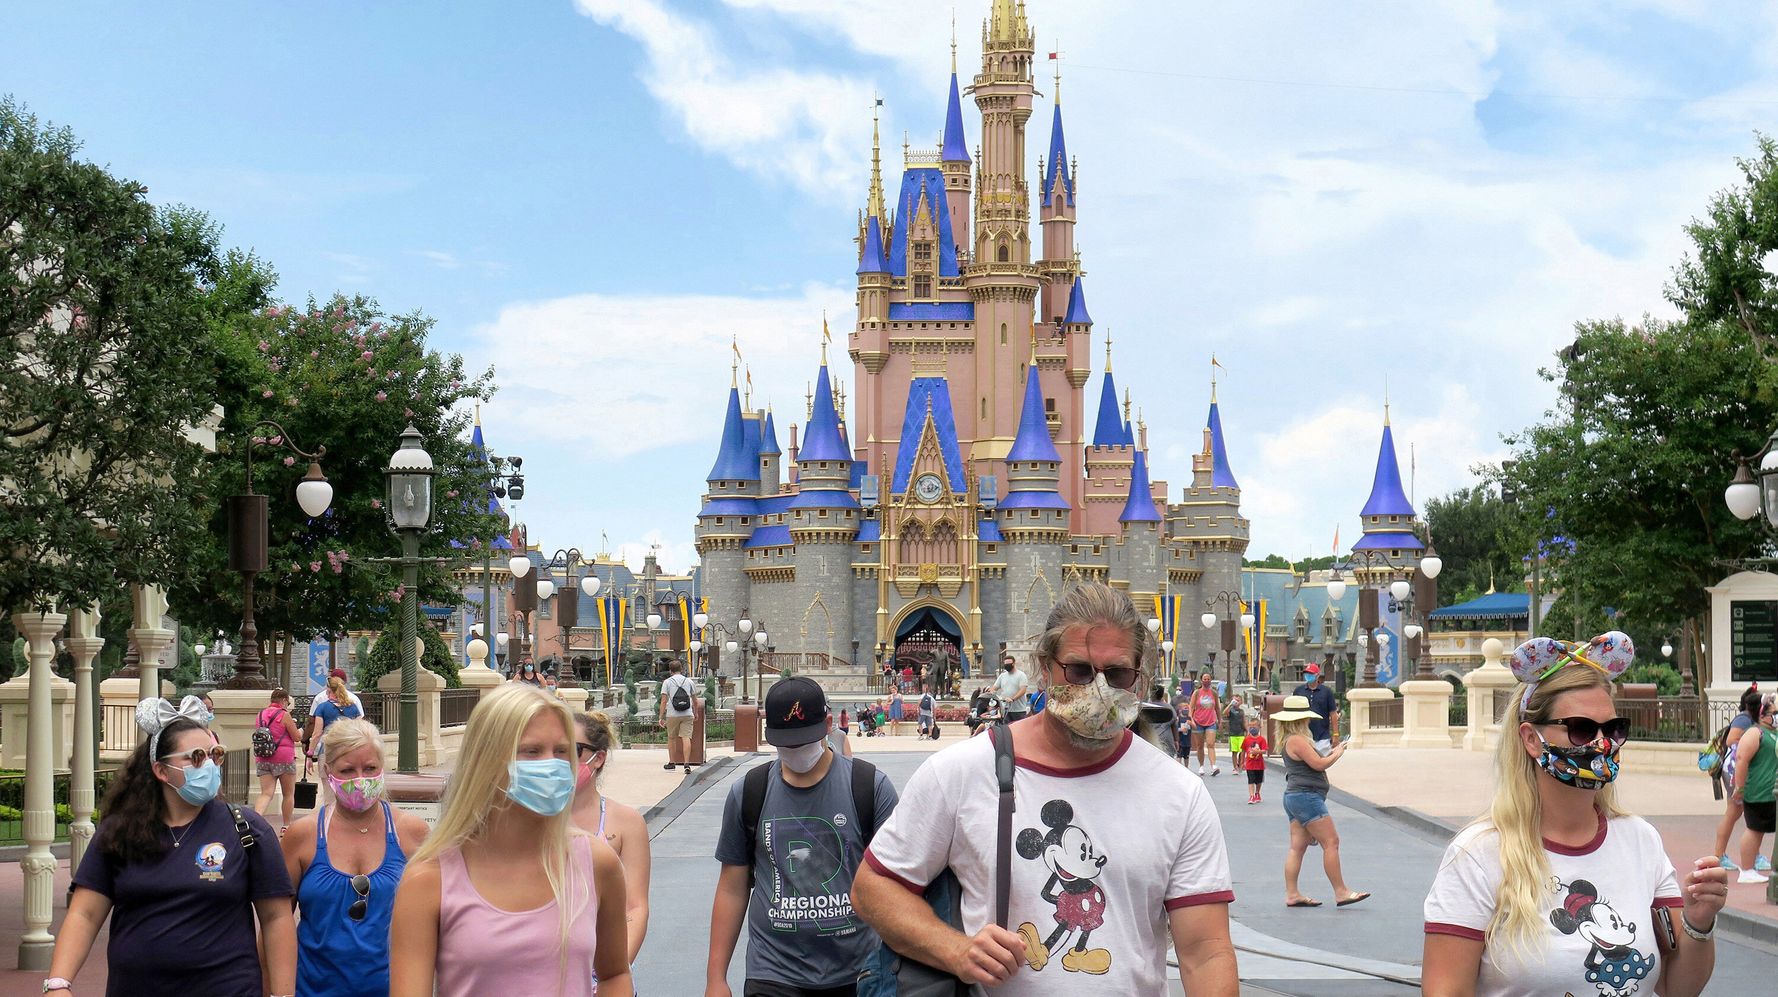 Man arrested at Disney World after refusing temperature check for COVID-19